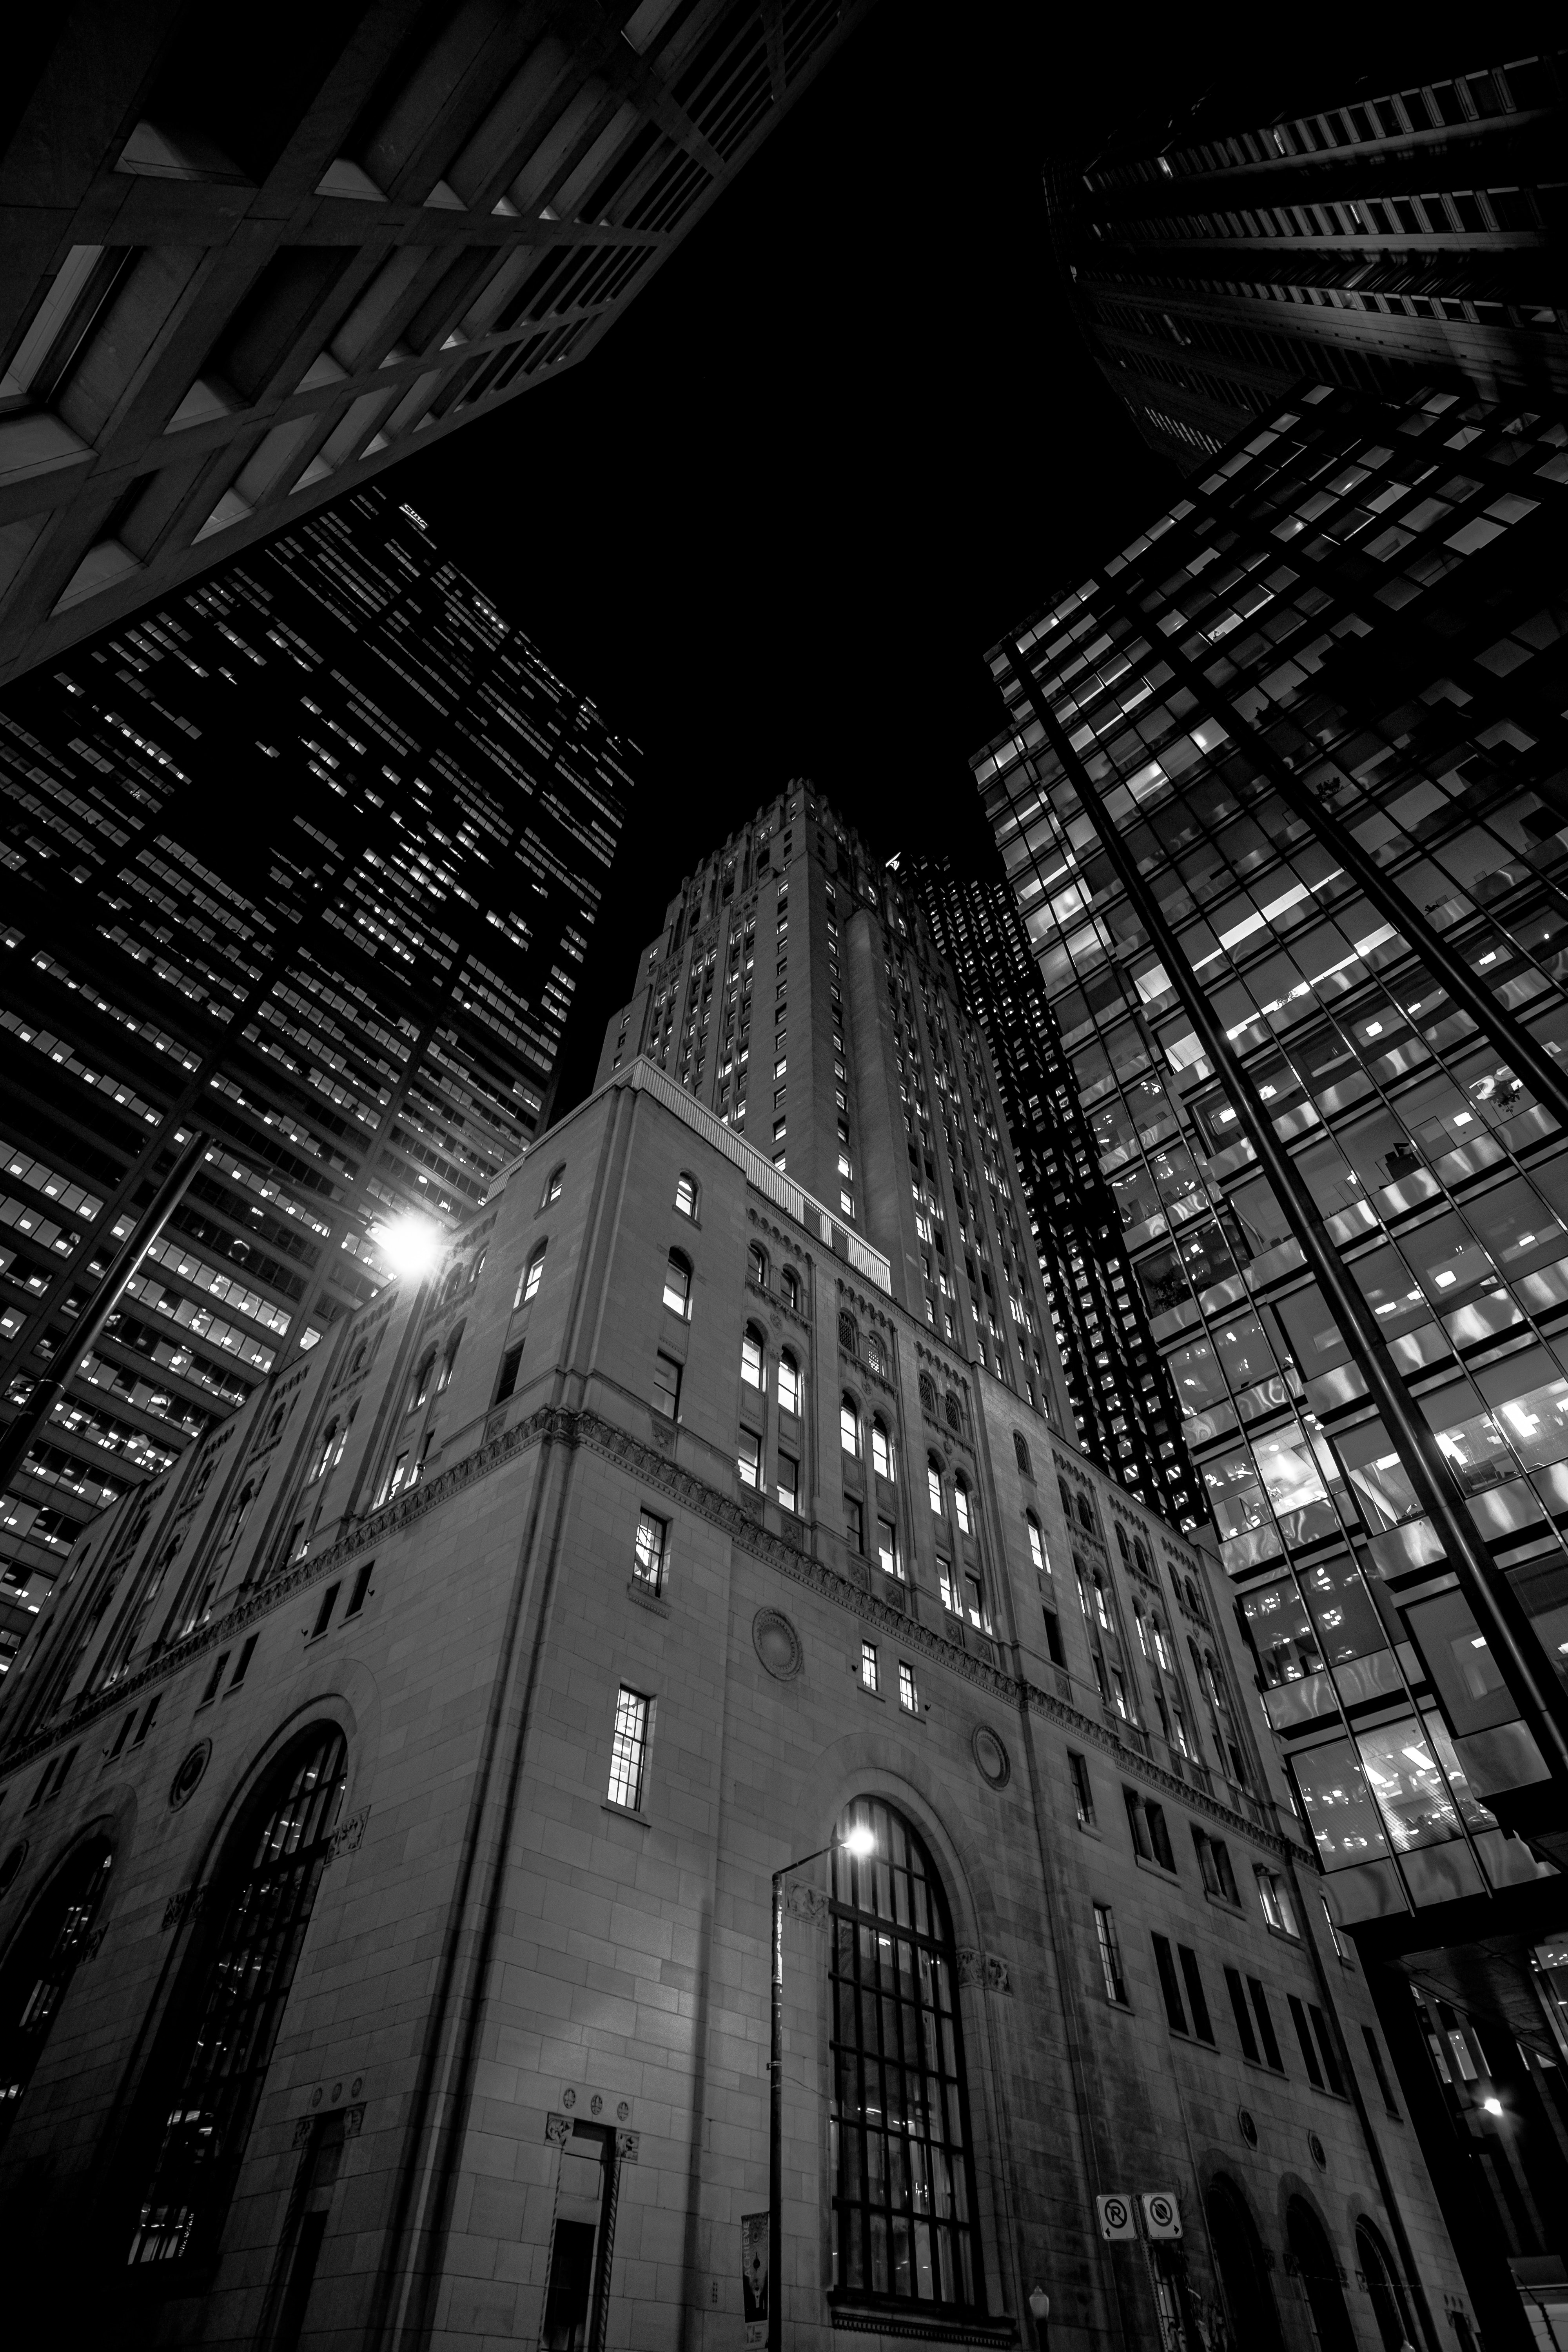 architecture, city, building, dark, bw, chb High Definition image